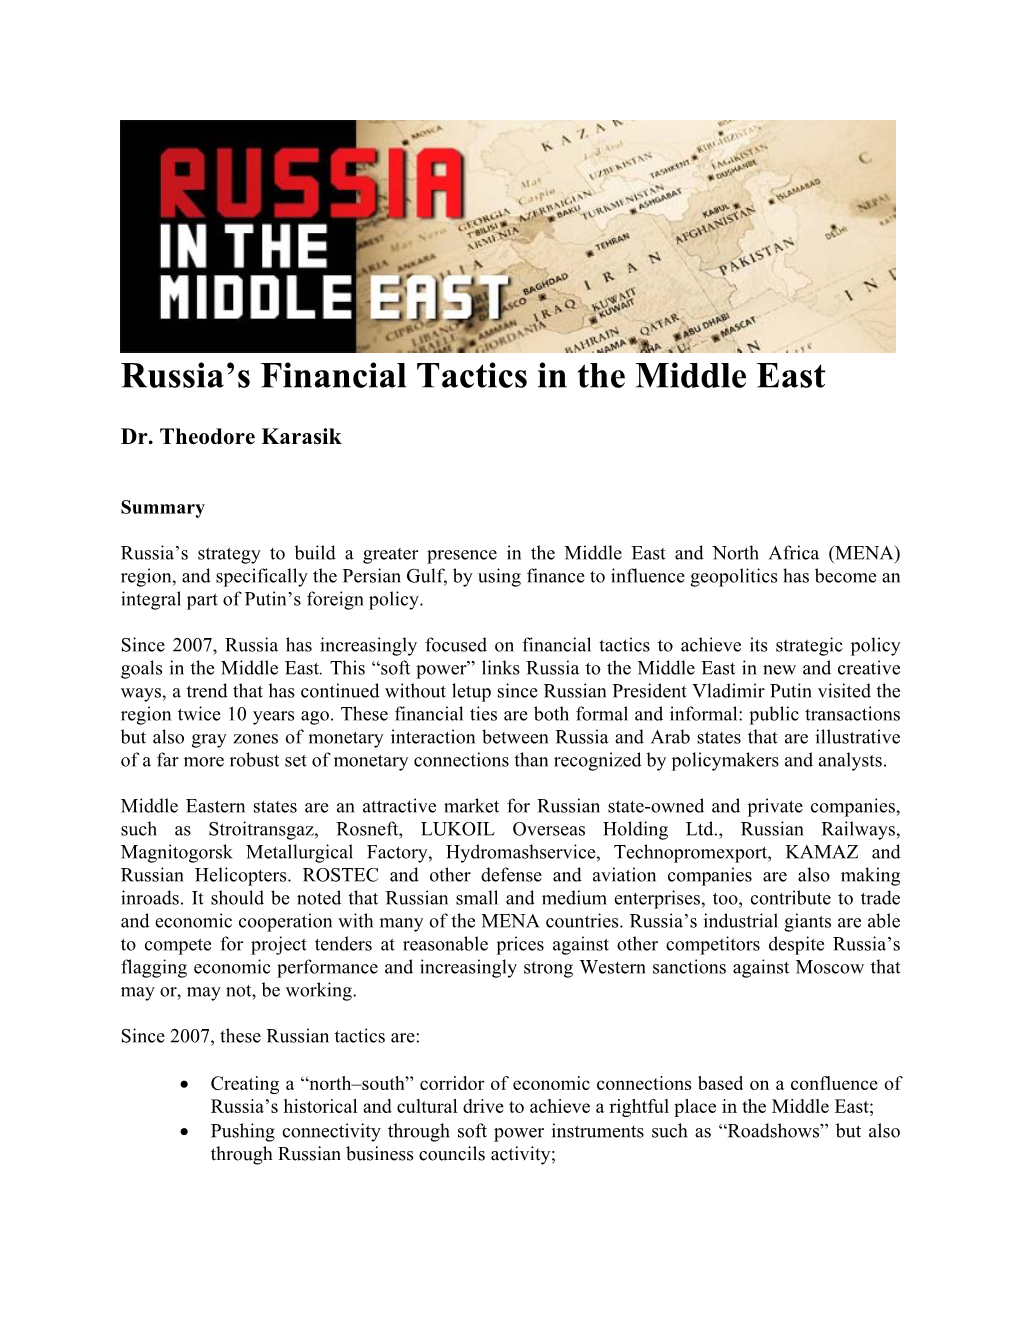 Russia's Financial Tactics in the Middle East